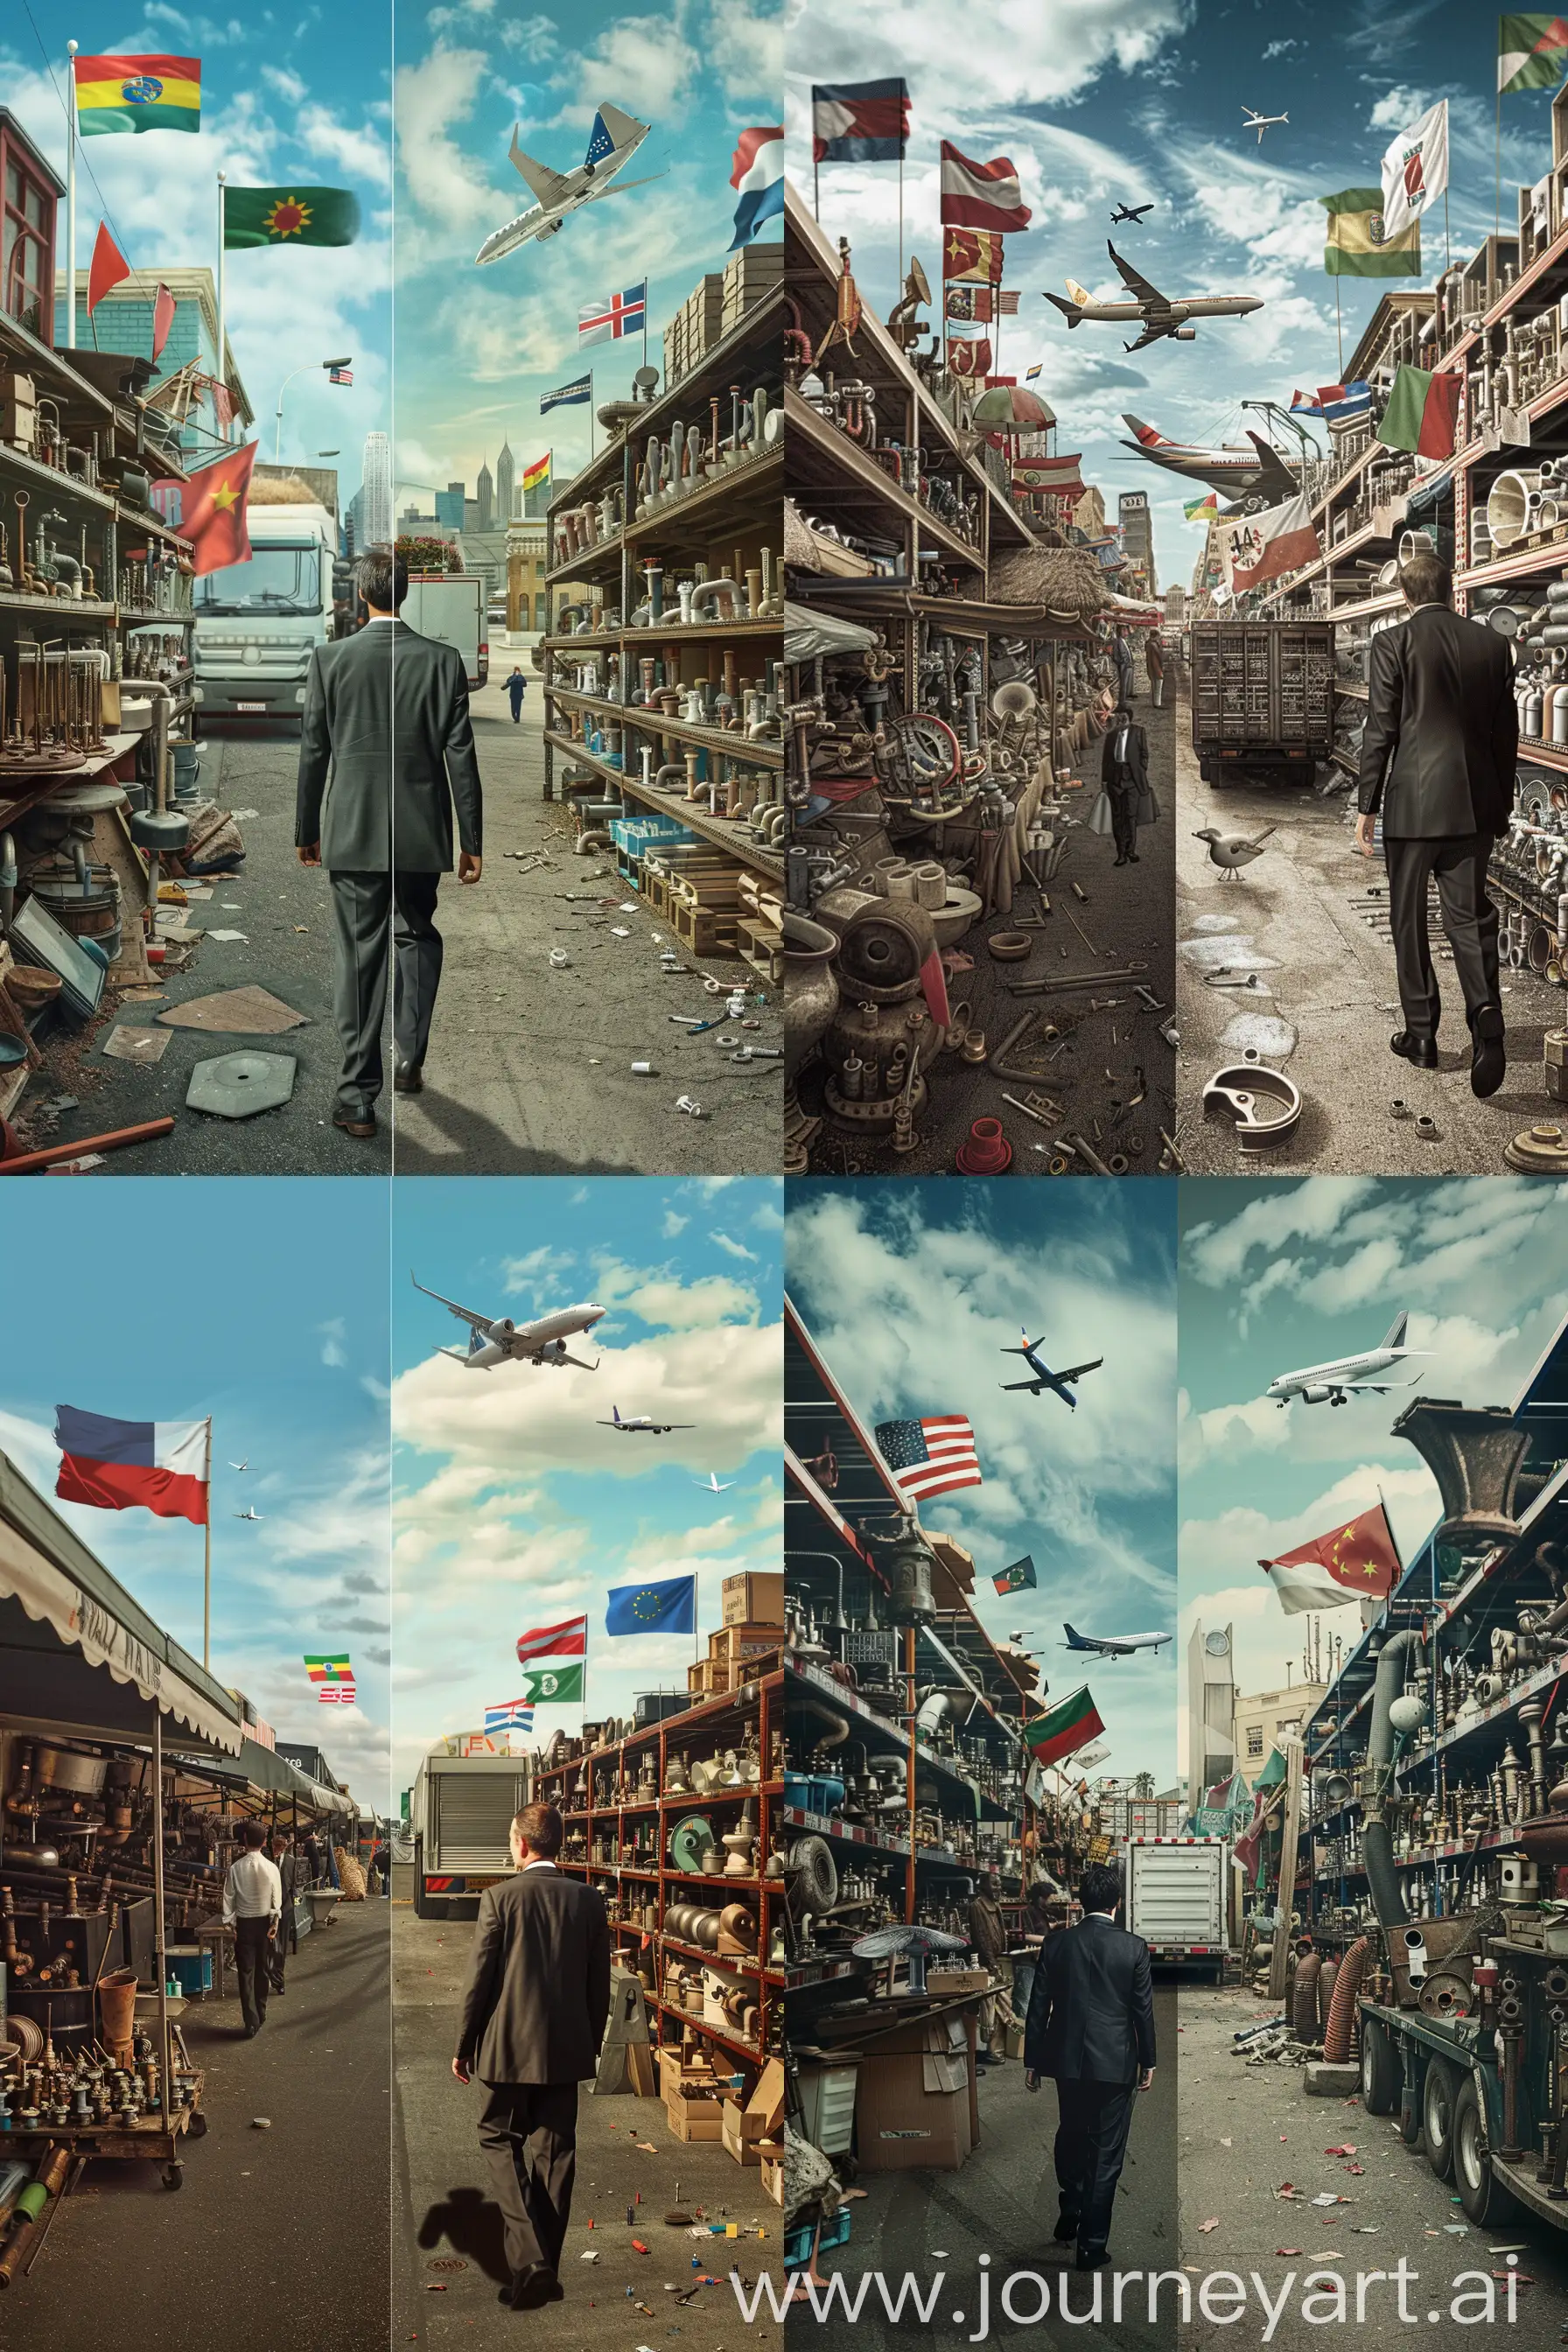 Divergent-Worlds-SuitClad-Man-Amidst-Flea-Market-and-Automated-Plumbing-Paradise